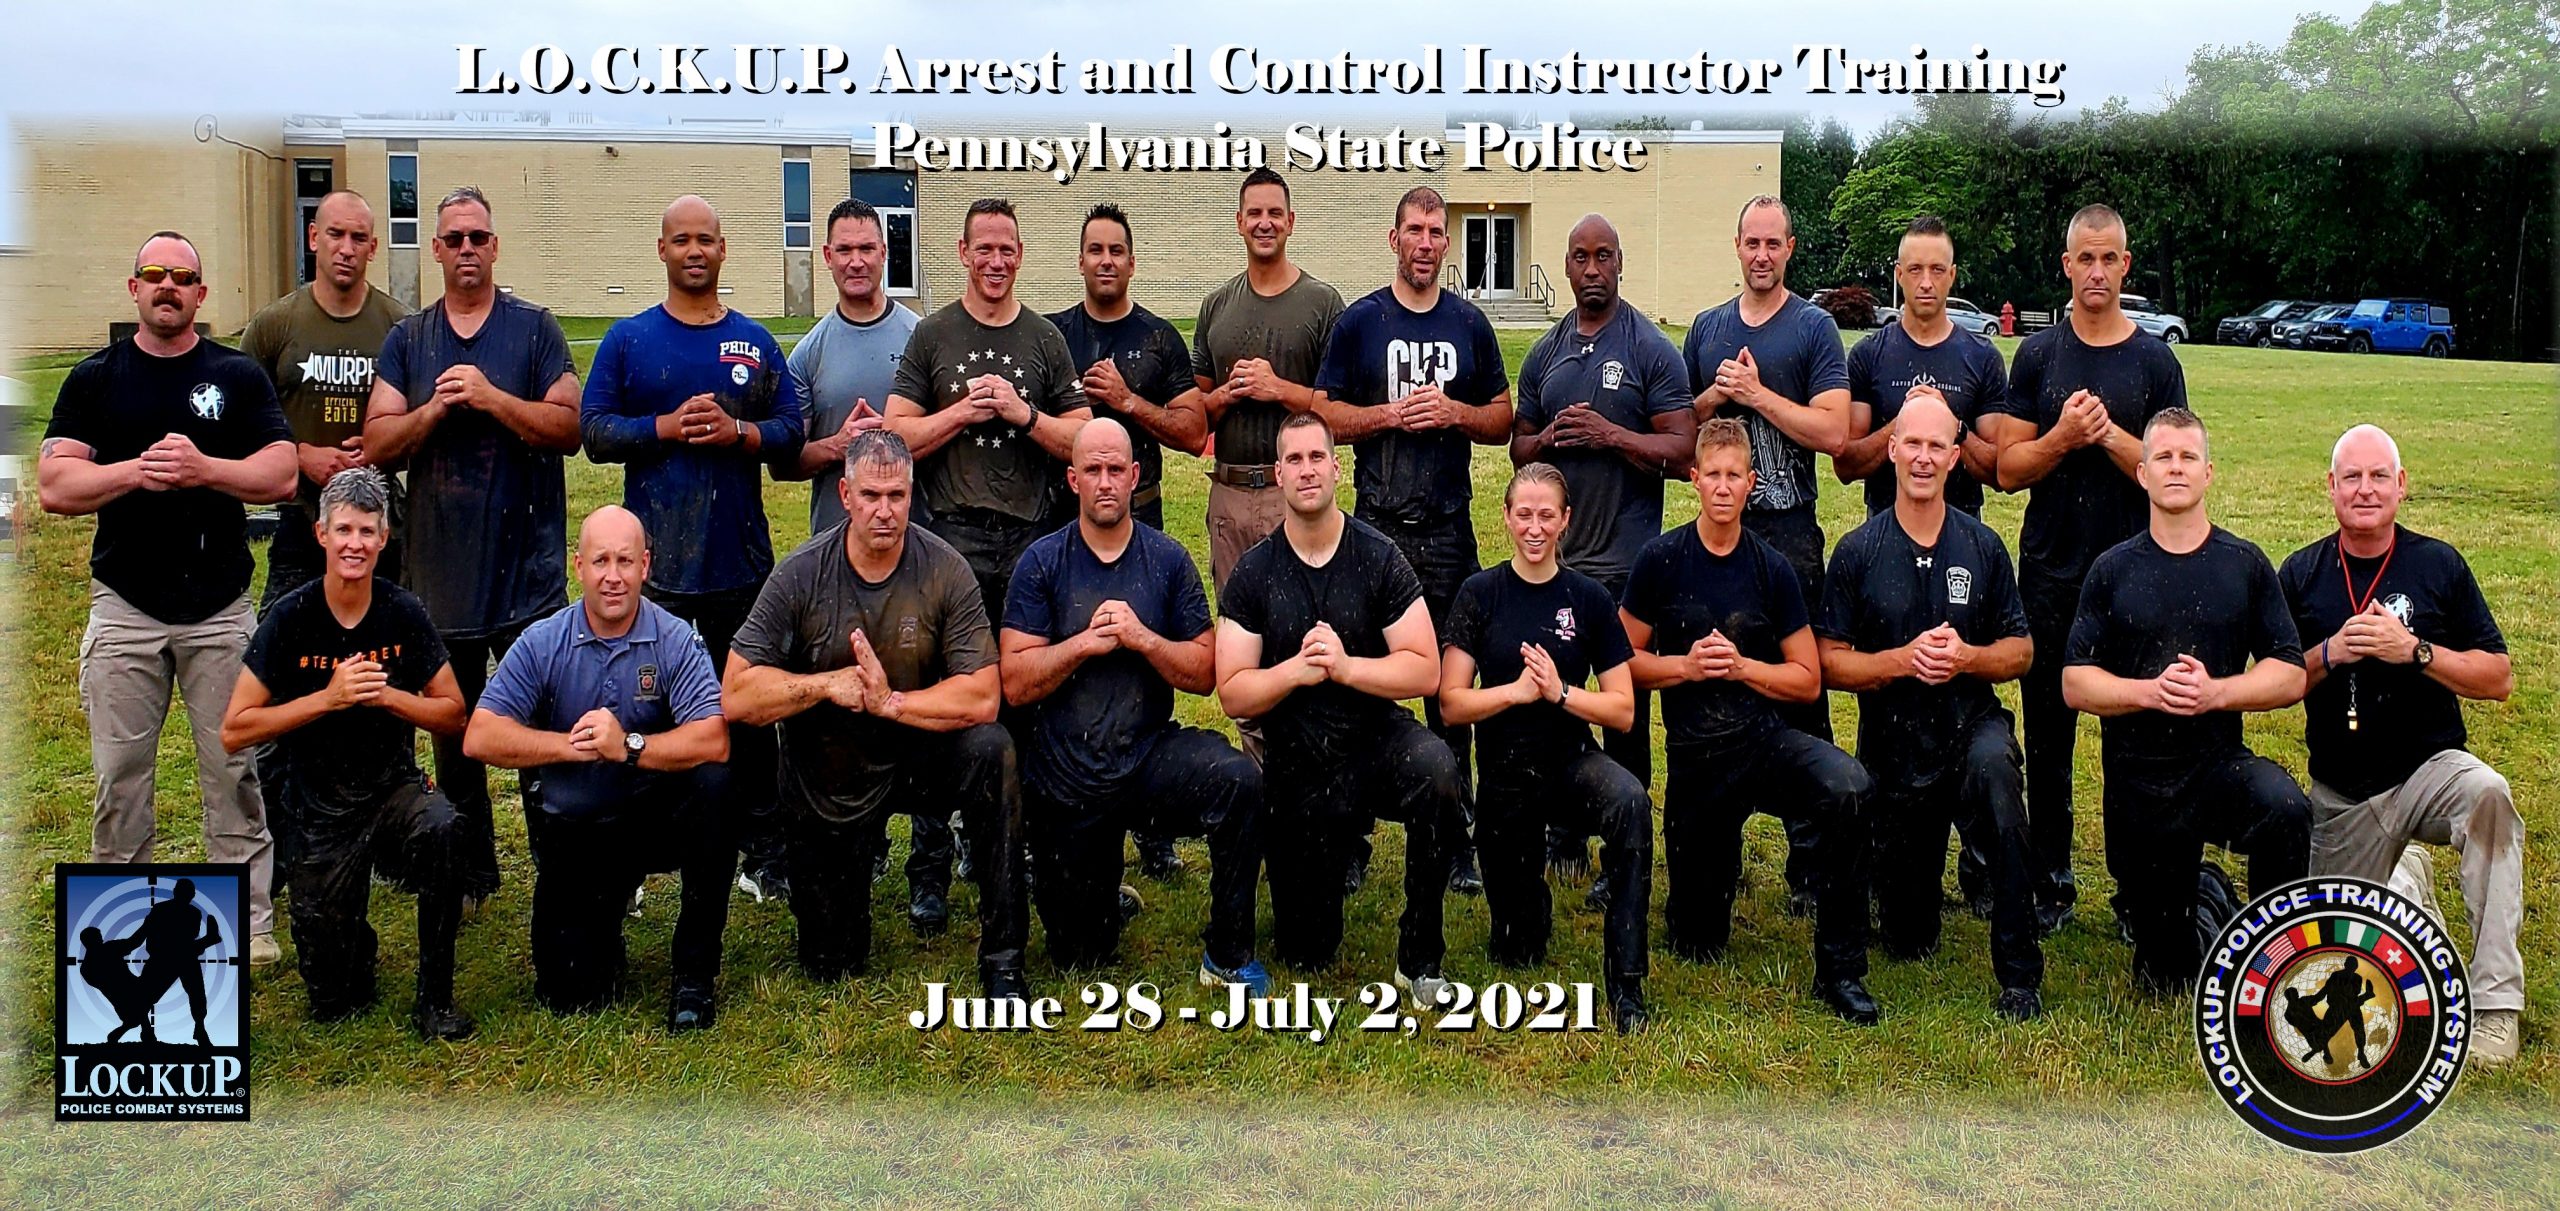 Pennsylvania State Police Trained As L.O.C.K.U.P. Instructors